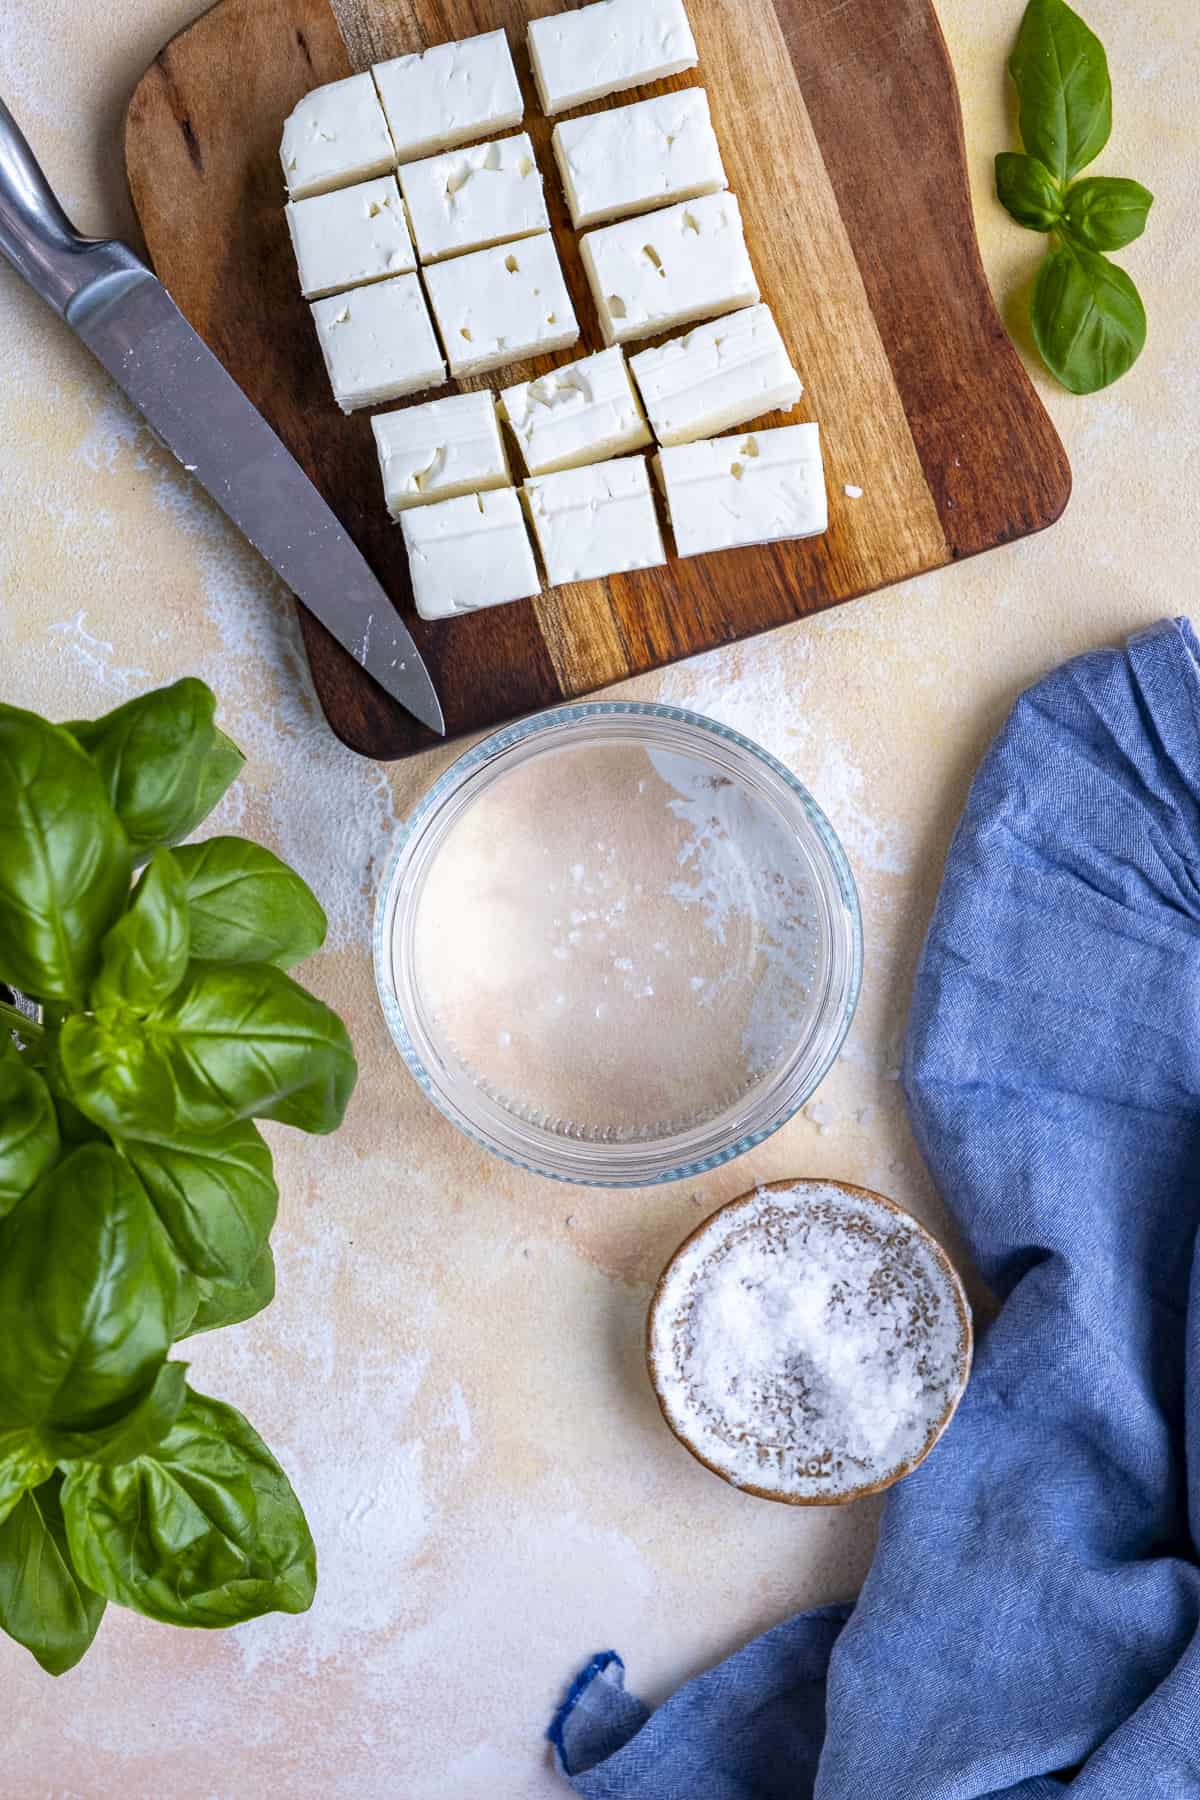 Water in a jar, kosher salt in a mini bowl, feta cheese cubes on a cutting board and fresh basil photographed on a light background.